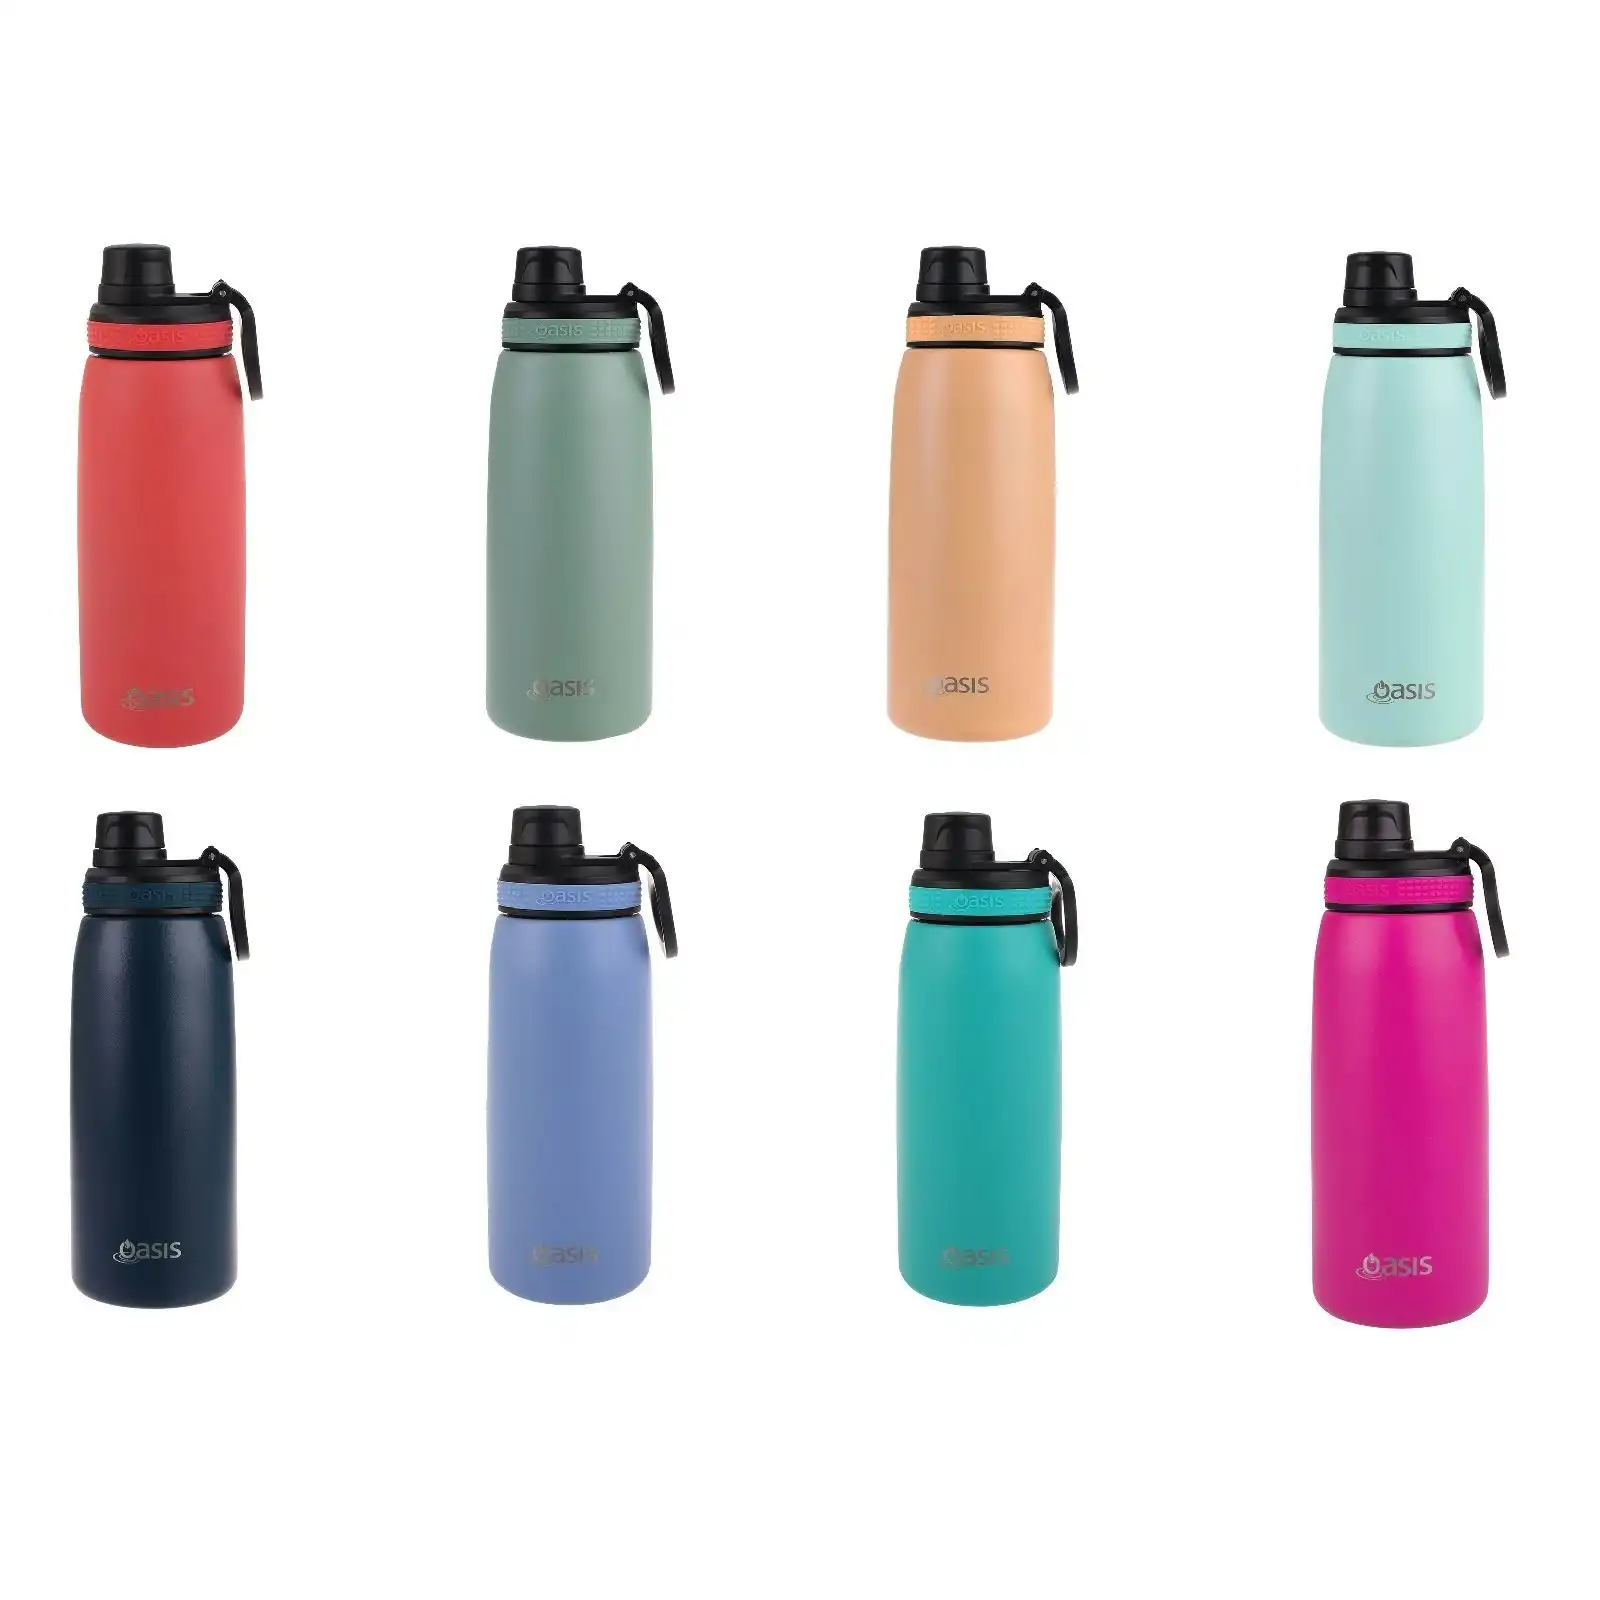 Oasis STAINLESS STEEL DOUBLE WALL INSULATED SPORTS BOTTLE WITH SCREW-CAP 780ml